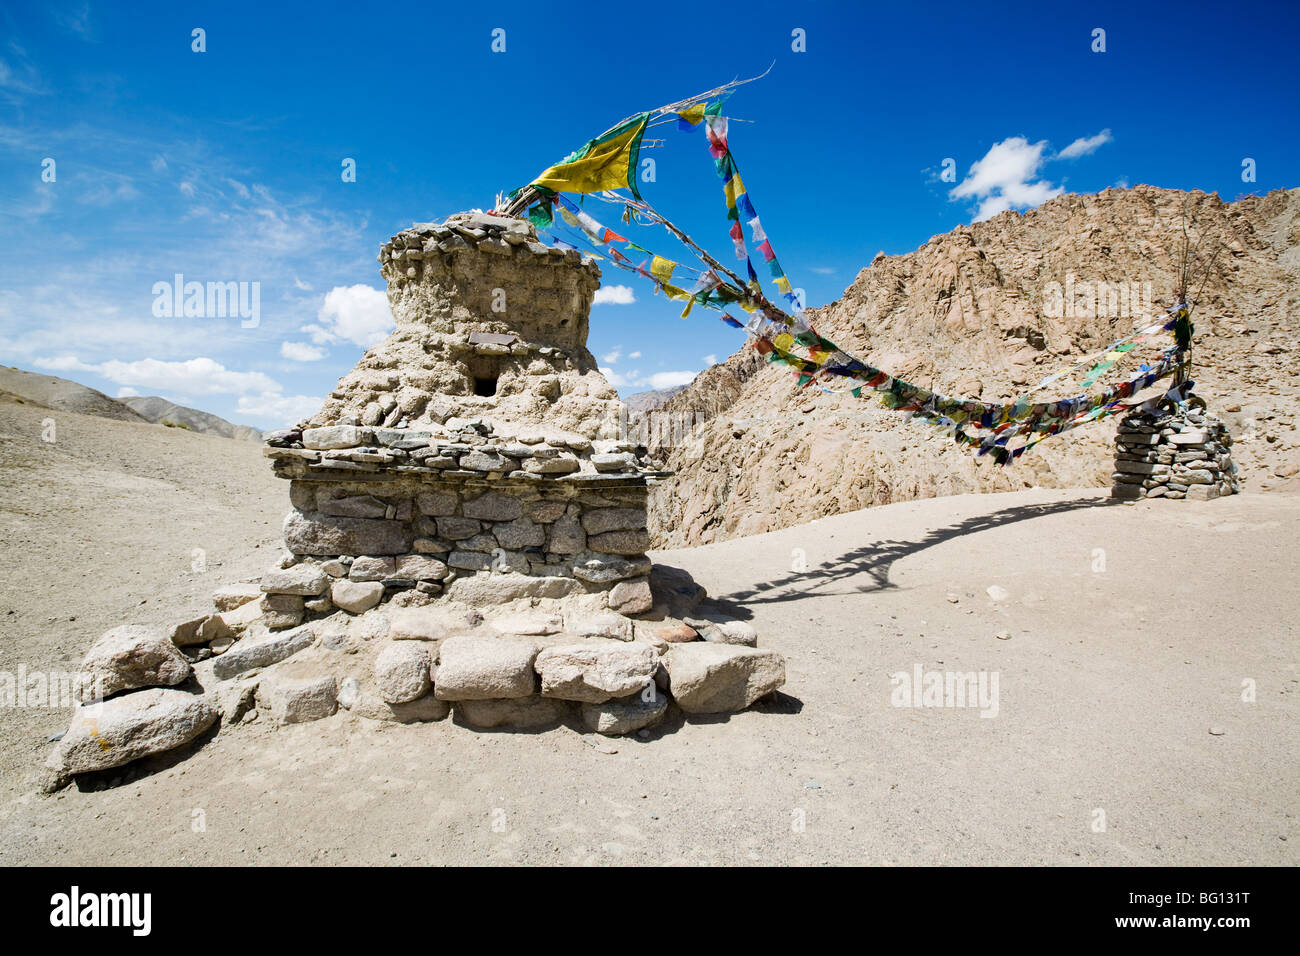 Stupas and Buddhist prayer flag mark the high pass on a mountain trekking route in Ladakh, Indian Himalayas. Stock Photo